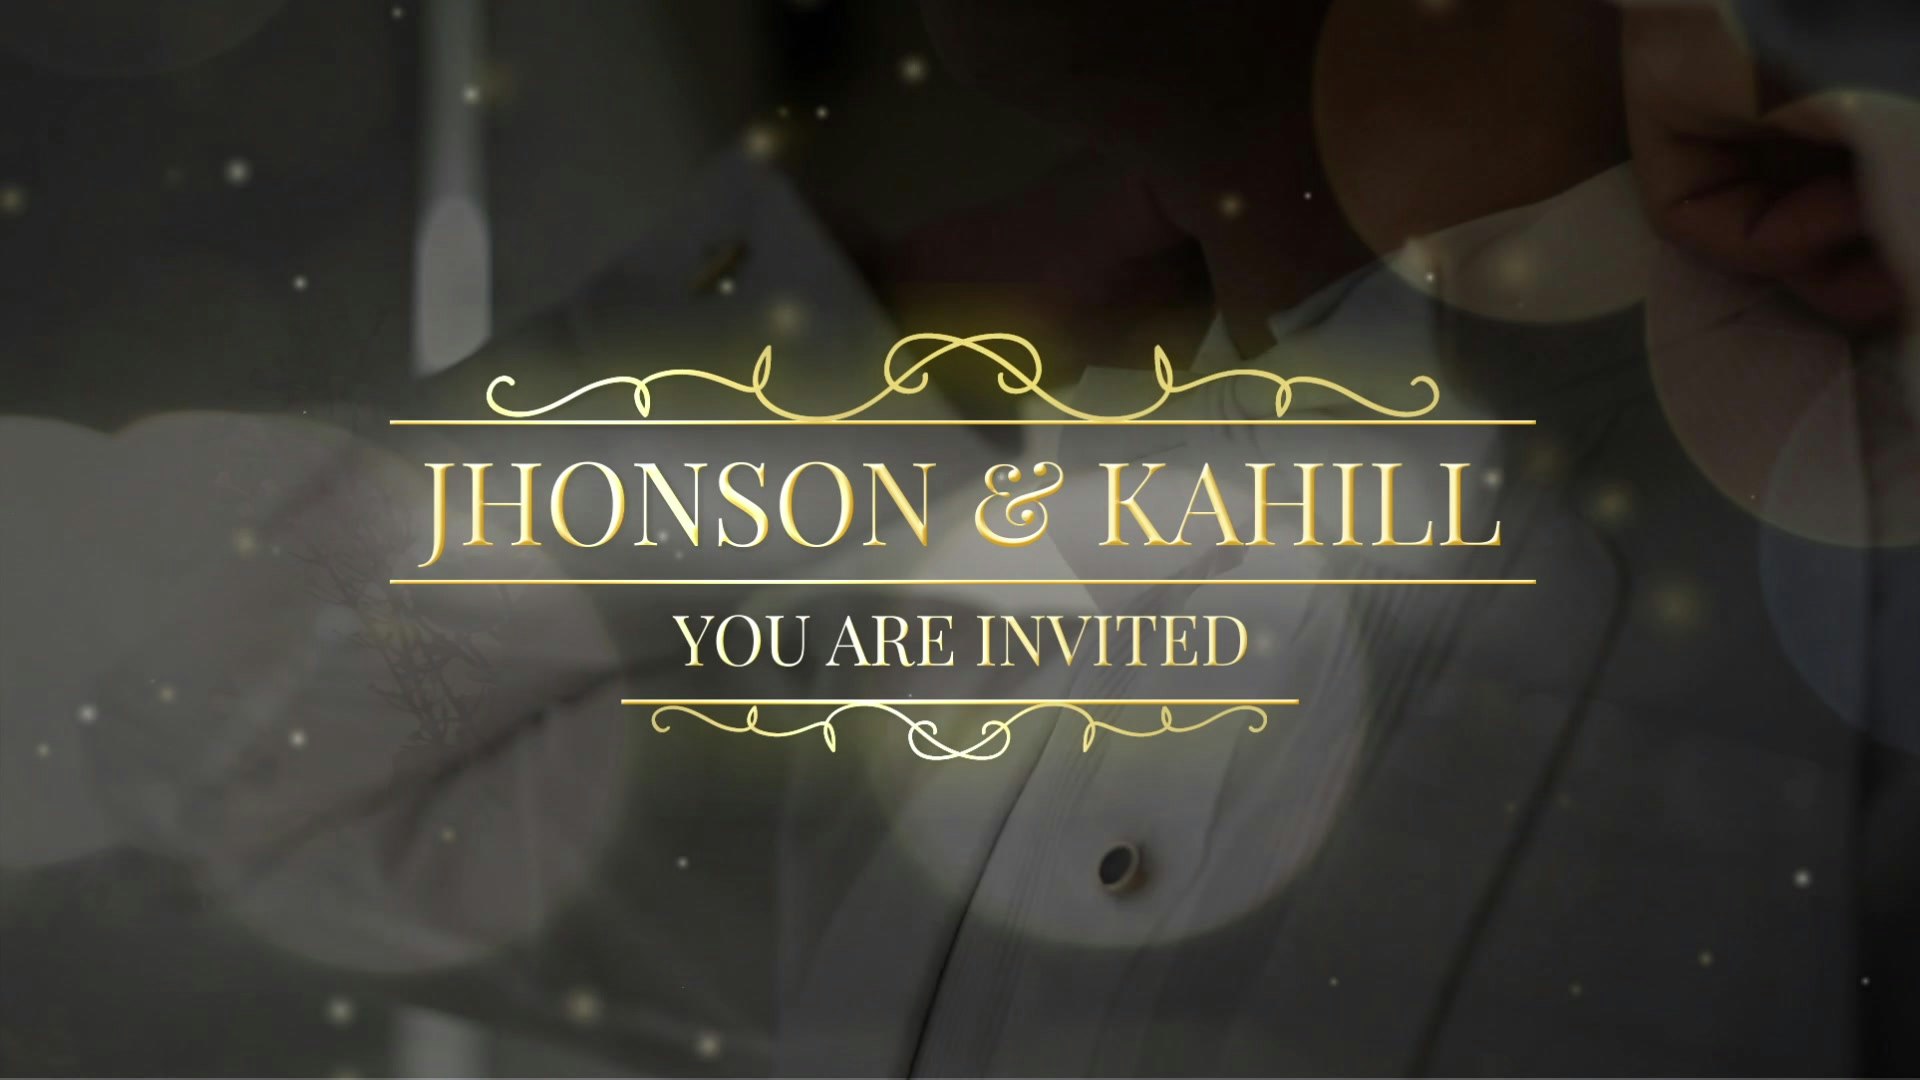 wedding opener after effects project free download